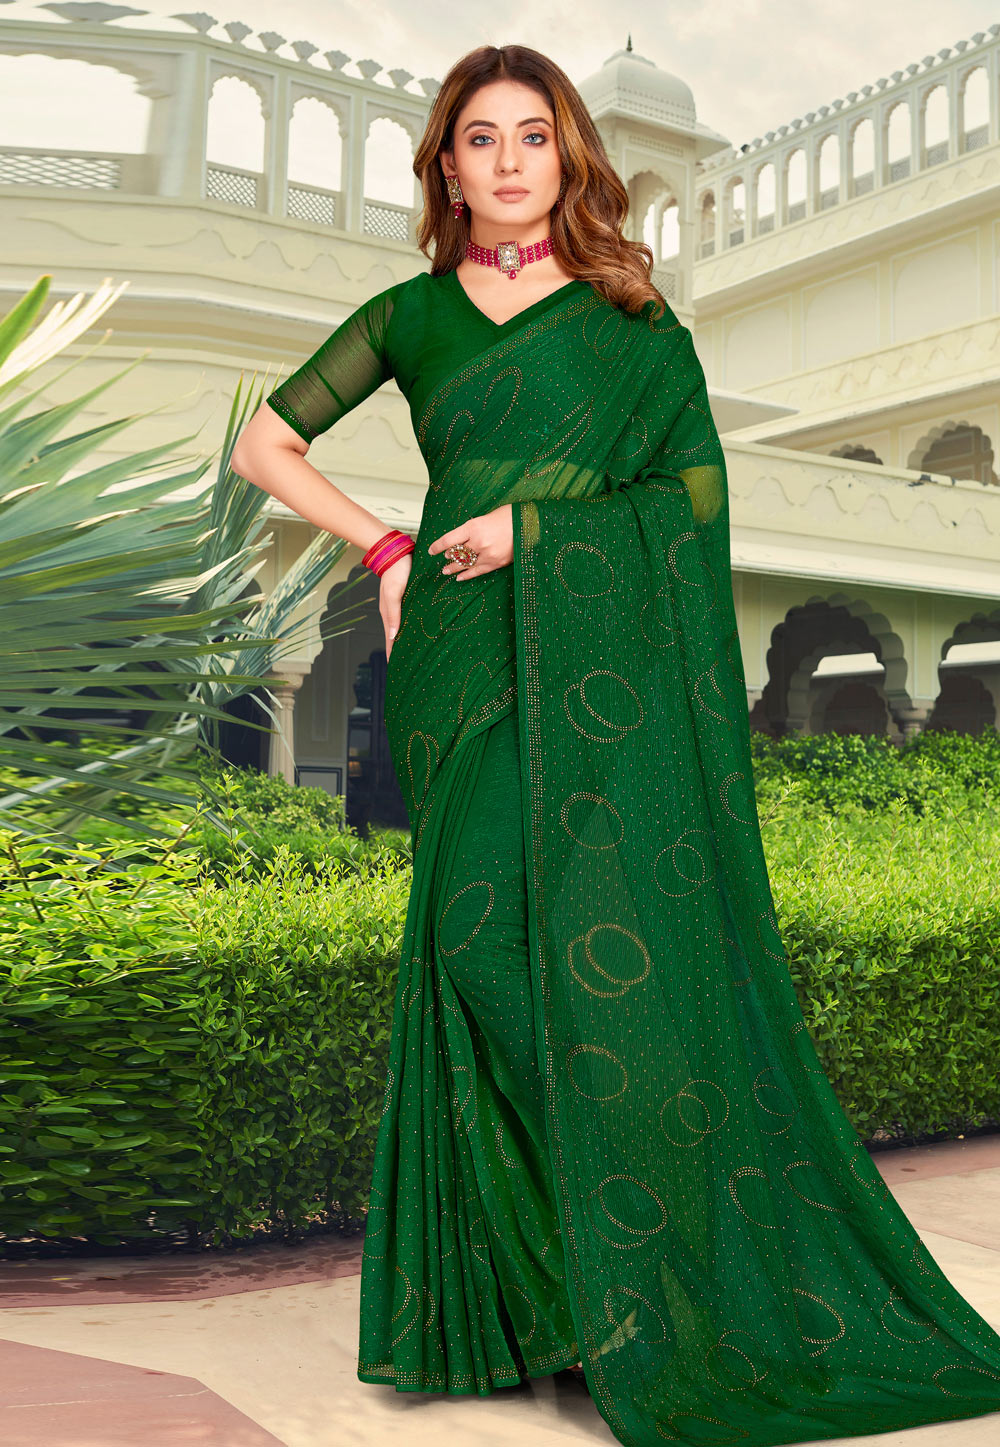 GREEN AND SILVER - LIGHT WEIGHT COTTON SAREE